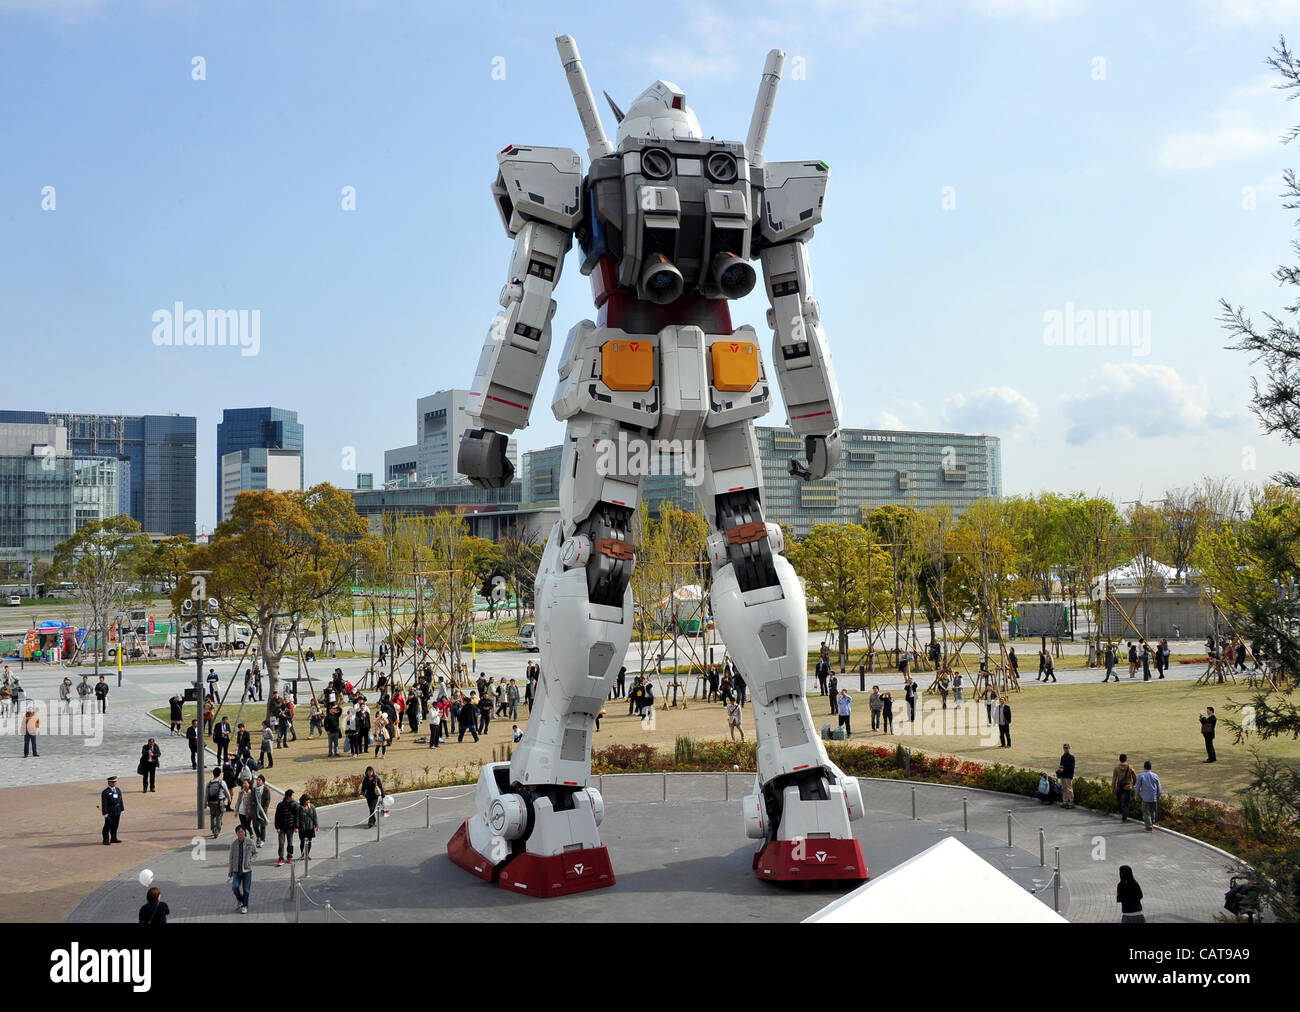 April 19, 2012, Tokyo, Japan. Spectators look up at 'Gundam' the 18-meter-tall  fighting robot from popular Japanese cartoon series returns to Odaiba,  Tokyos waterfront area to celebrate the grand opening of the